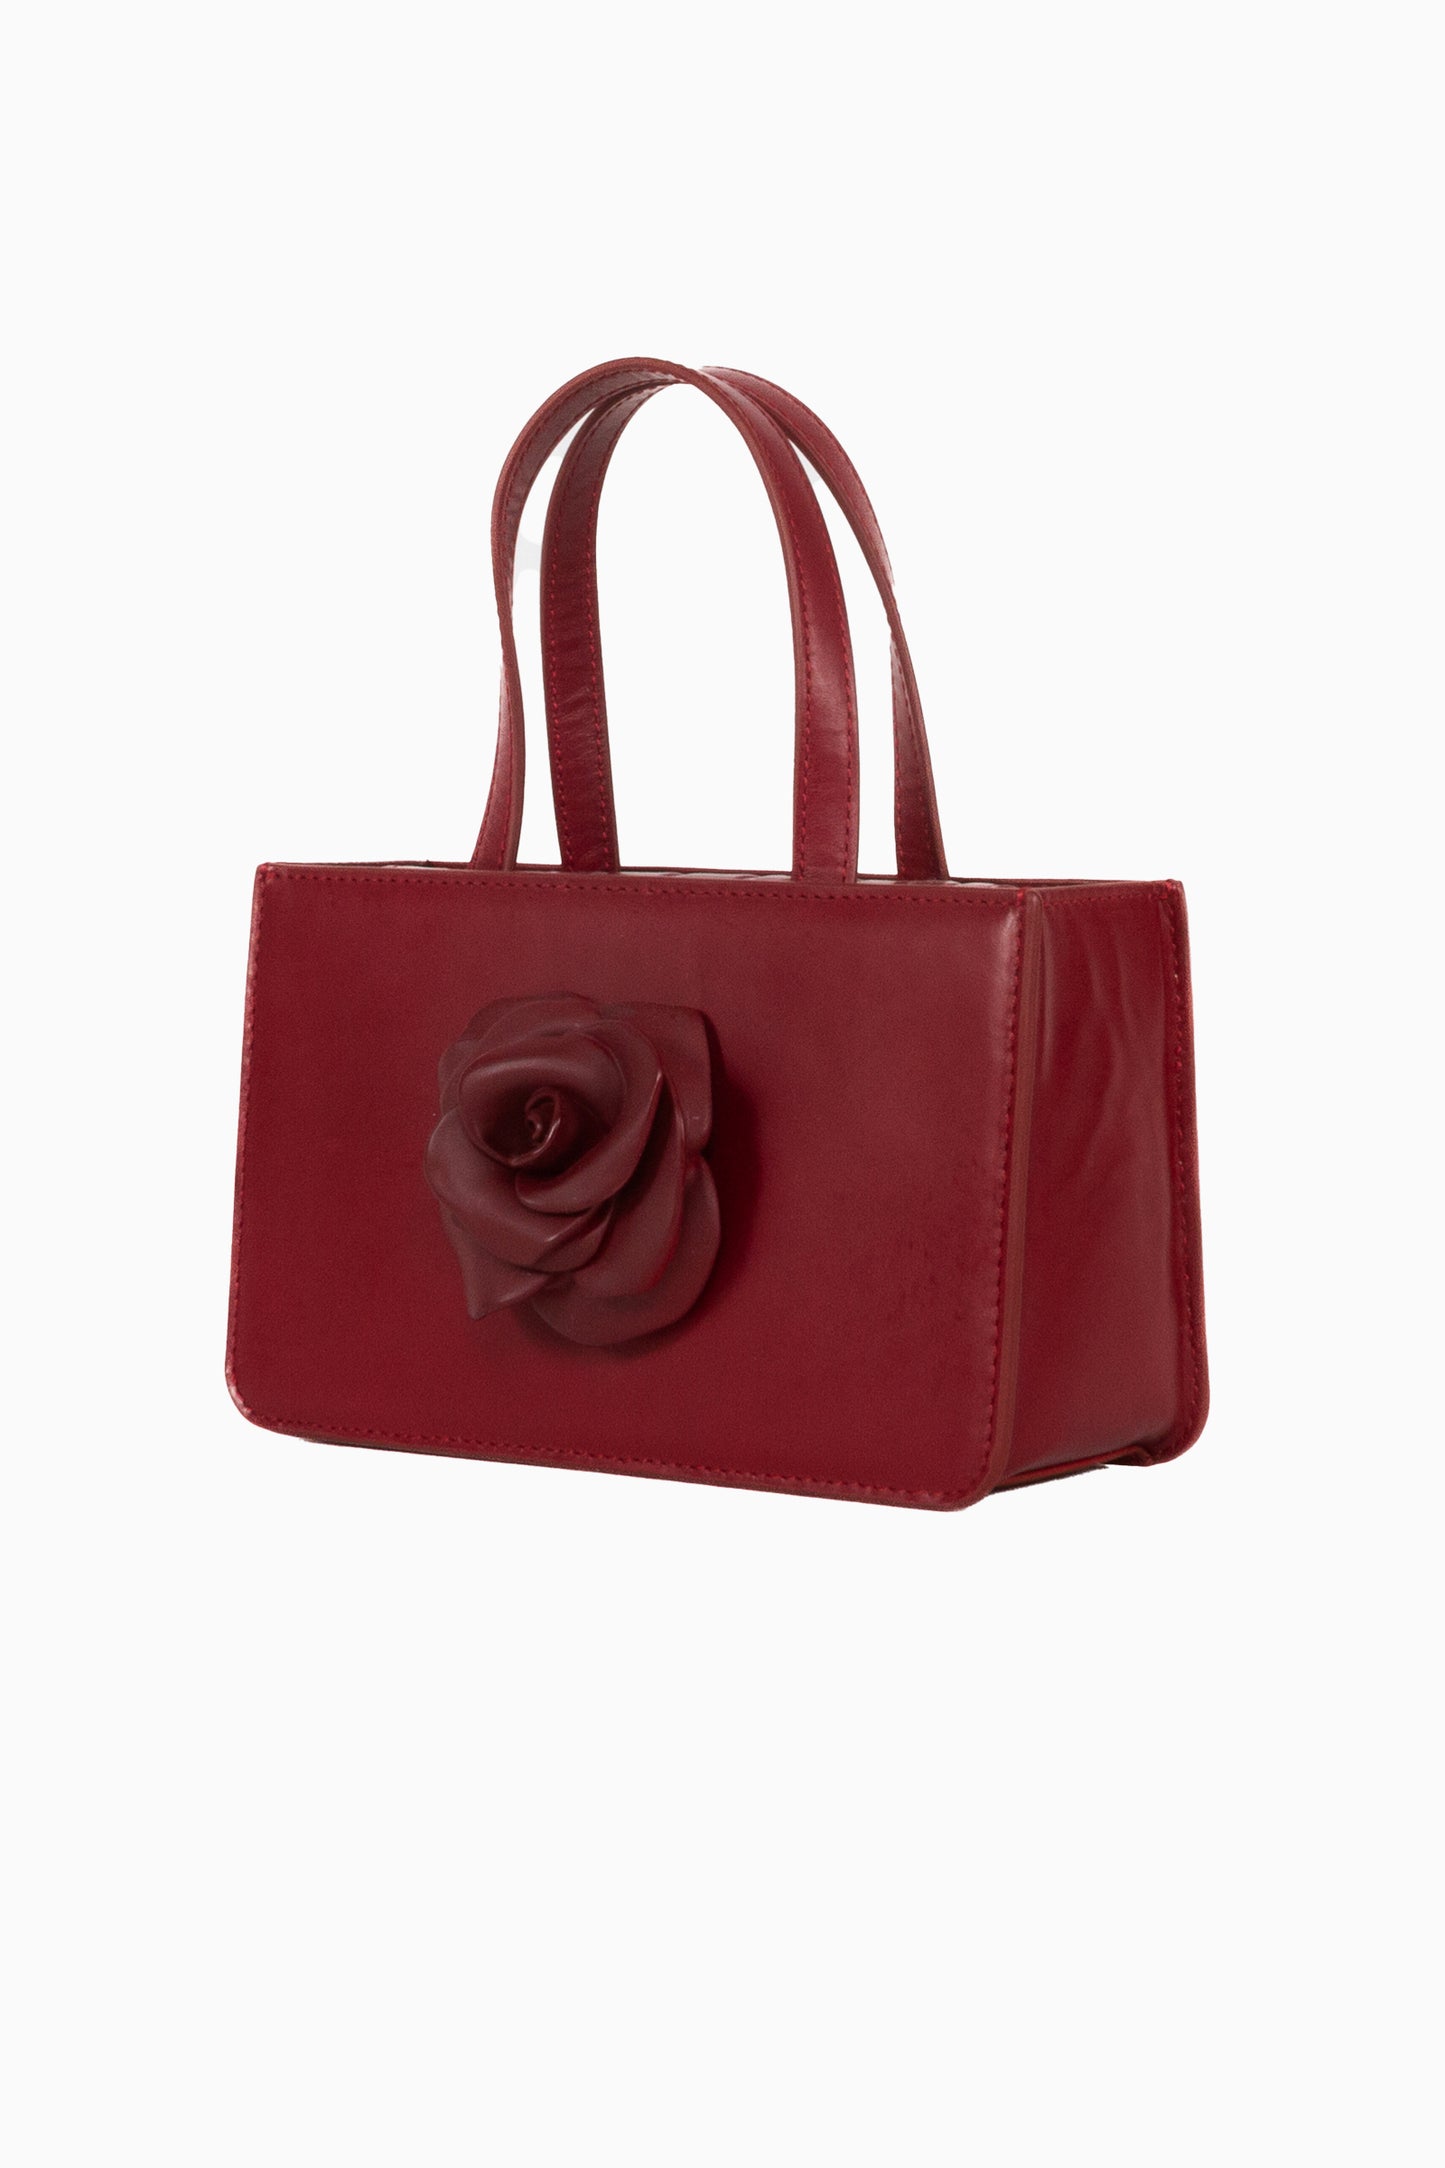 Small Rose Bag - Oxblood